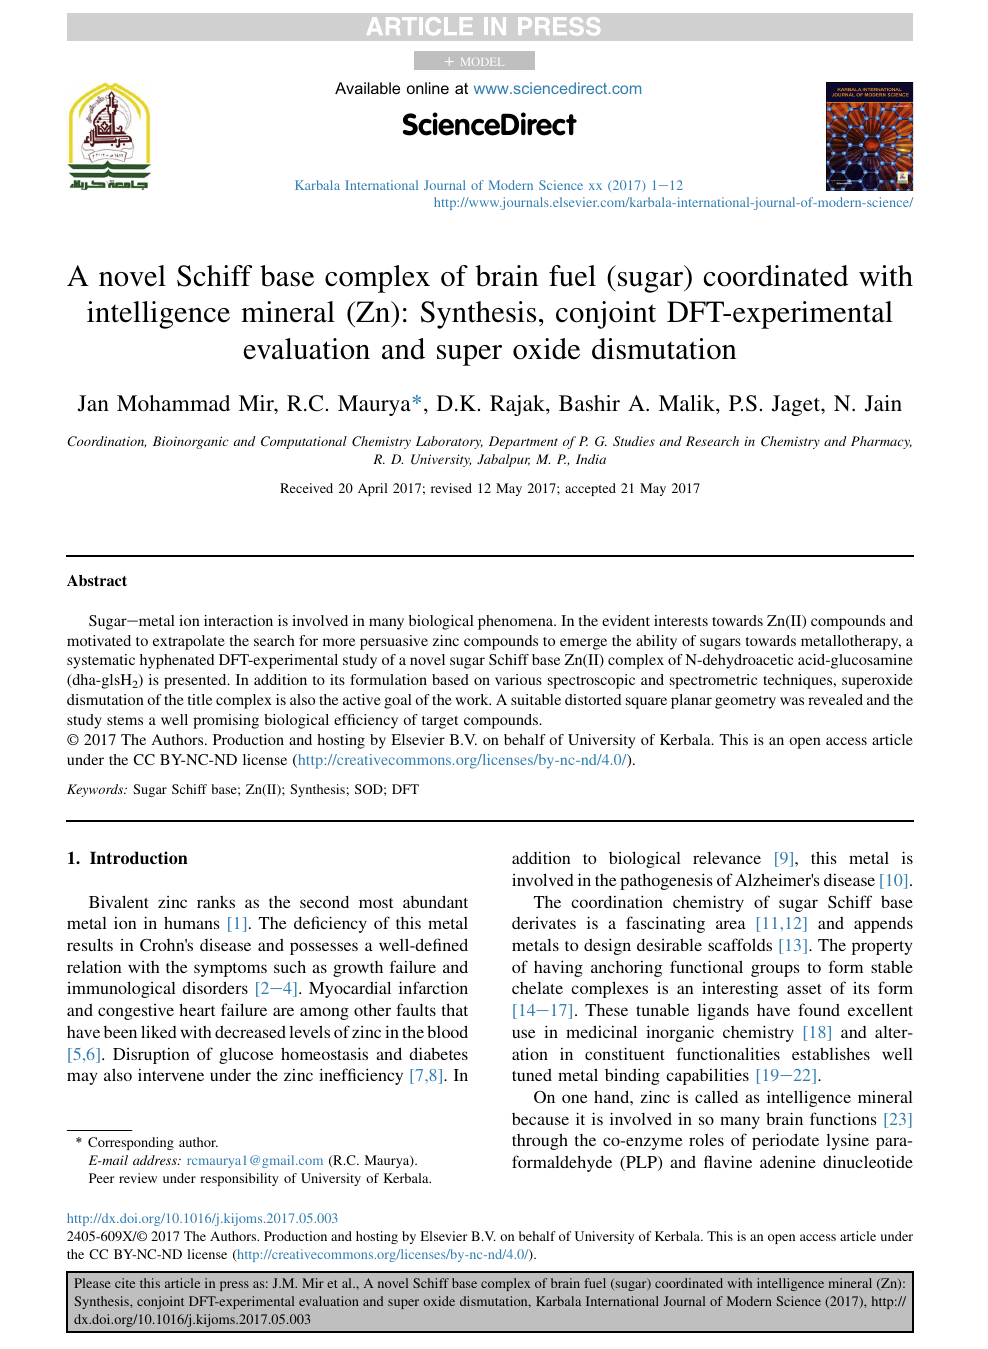 A Novel Schiff Base Complex Of Brain Fuel Sugar Coordinated With Intelligence Mineral Zn Synthesis Conjoint Dft Experimental Evaluation And Super Oxide Dismutation Topic Of Research Paper In Chemical Sciences Download Scholarly